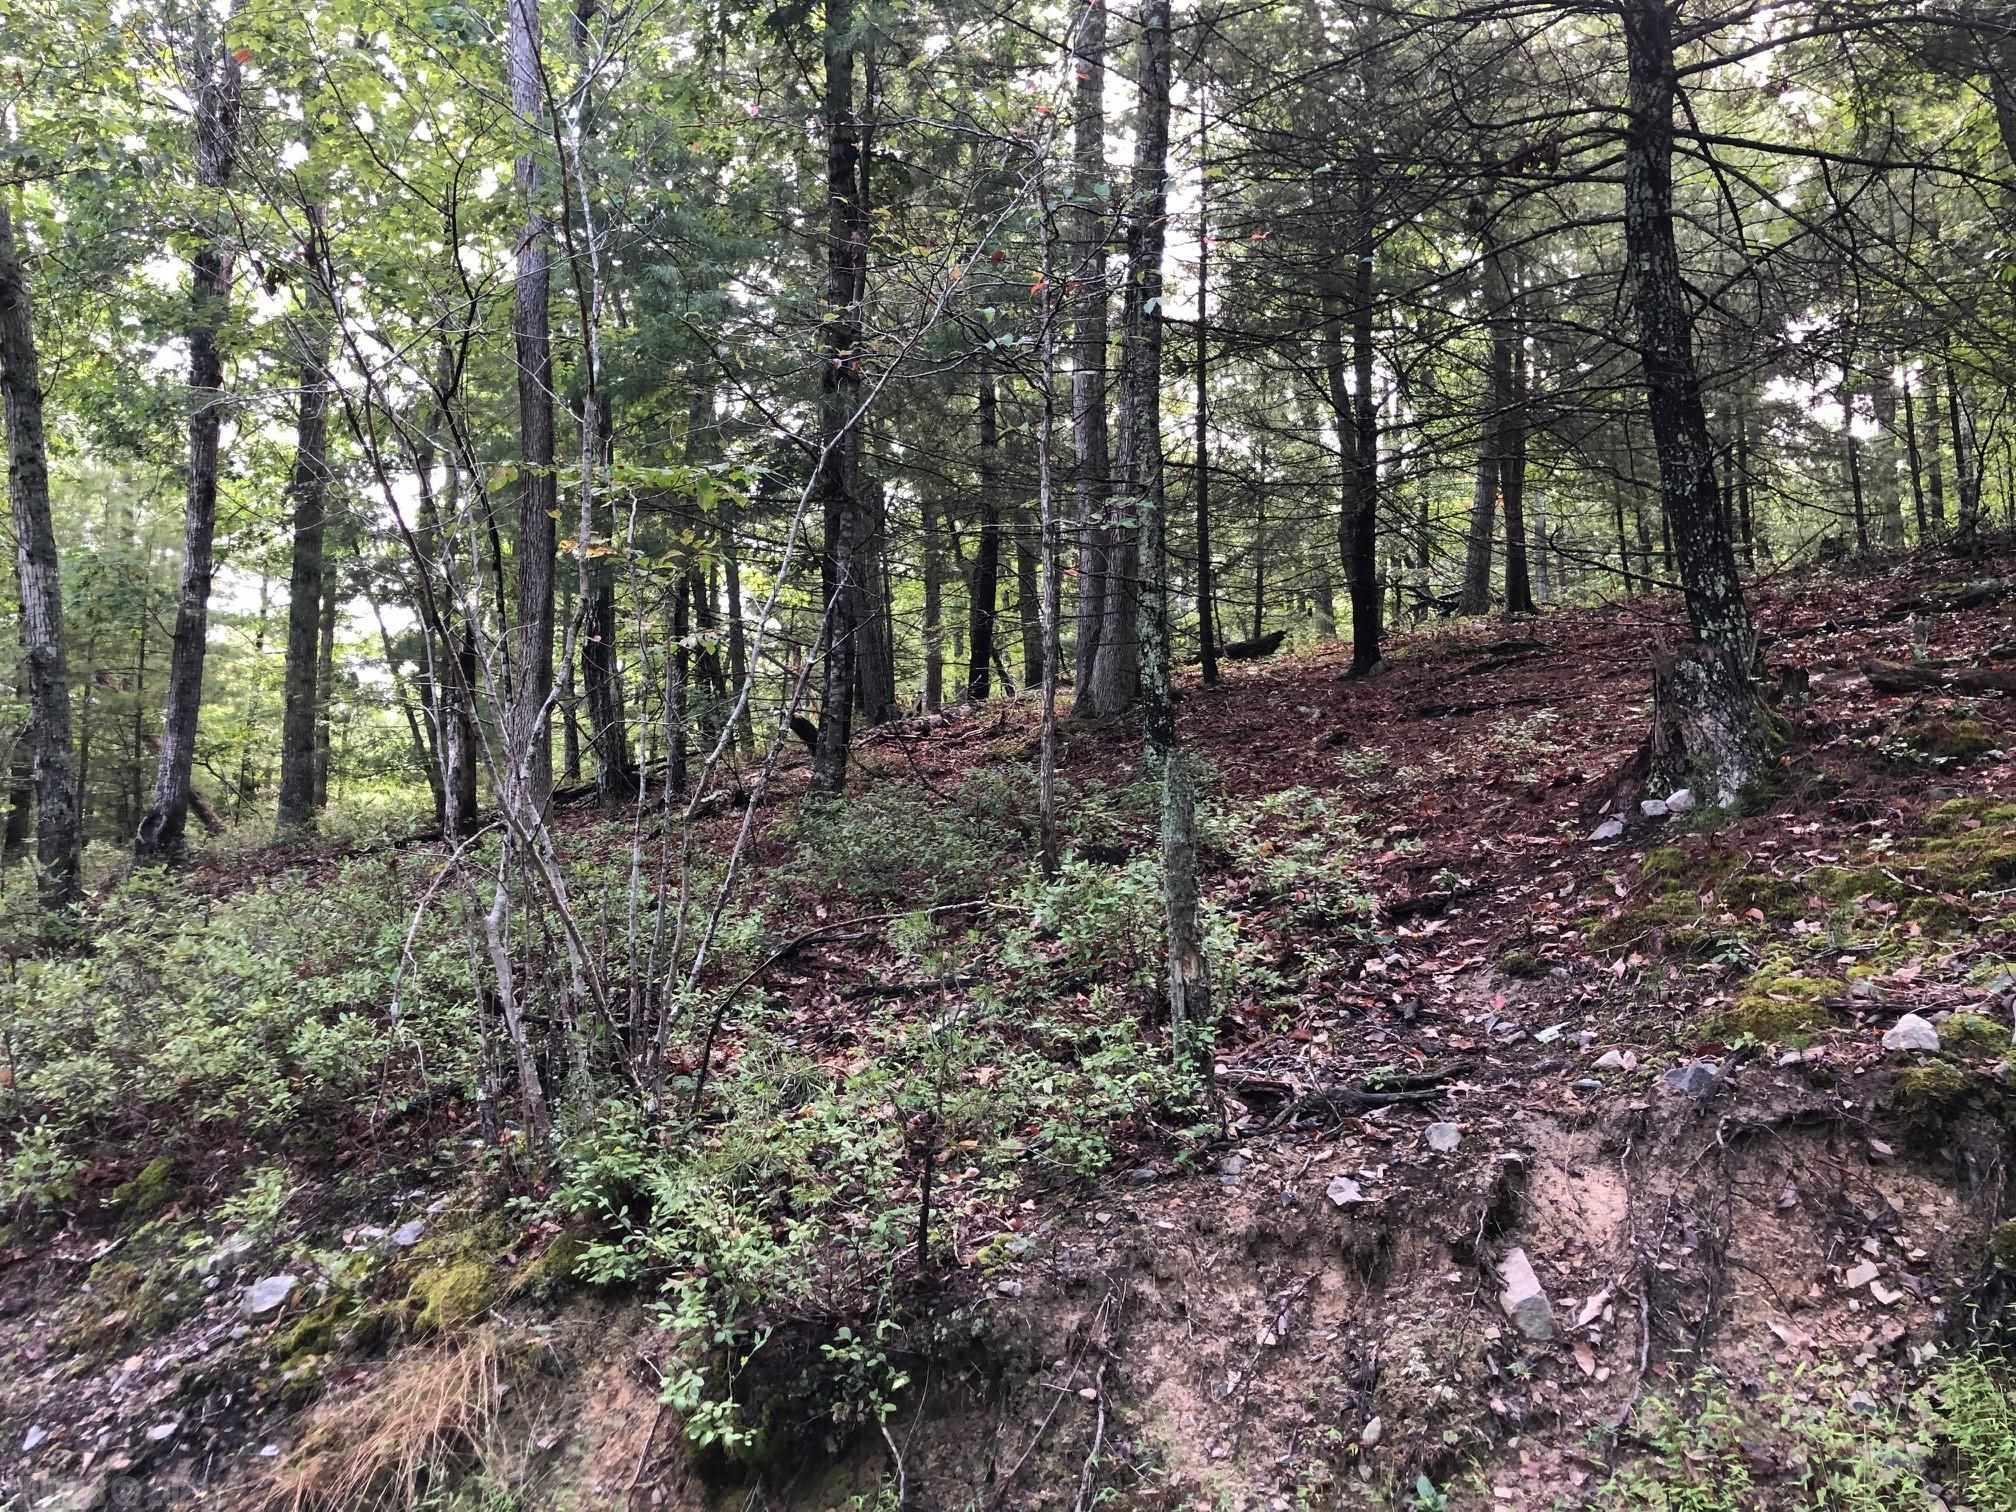 Great 1.577 Acre building lot in Auburn School District.  Priced below current tax assessment.  Convenient location close to Radford University, CNRVMC, I81, Rt 11, Rt 114, VT and all points in the NRV. Soil work for Septic, Covenants and Restrictions, and Survey in the Documents.